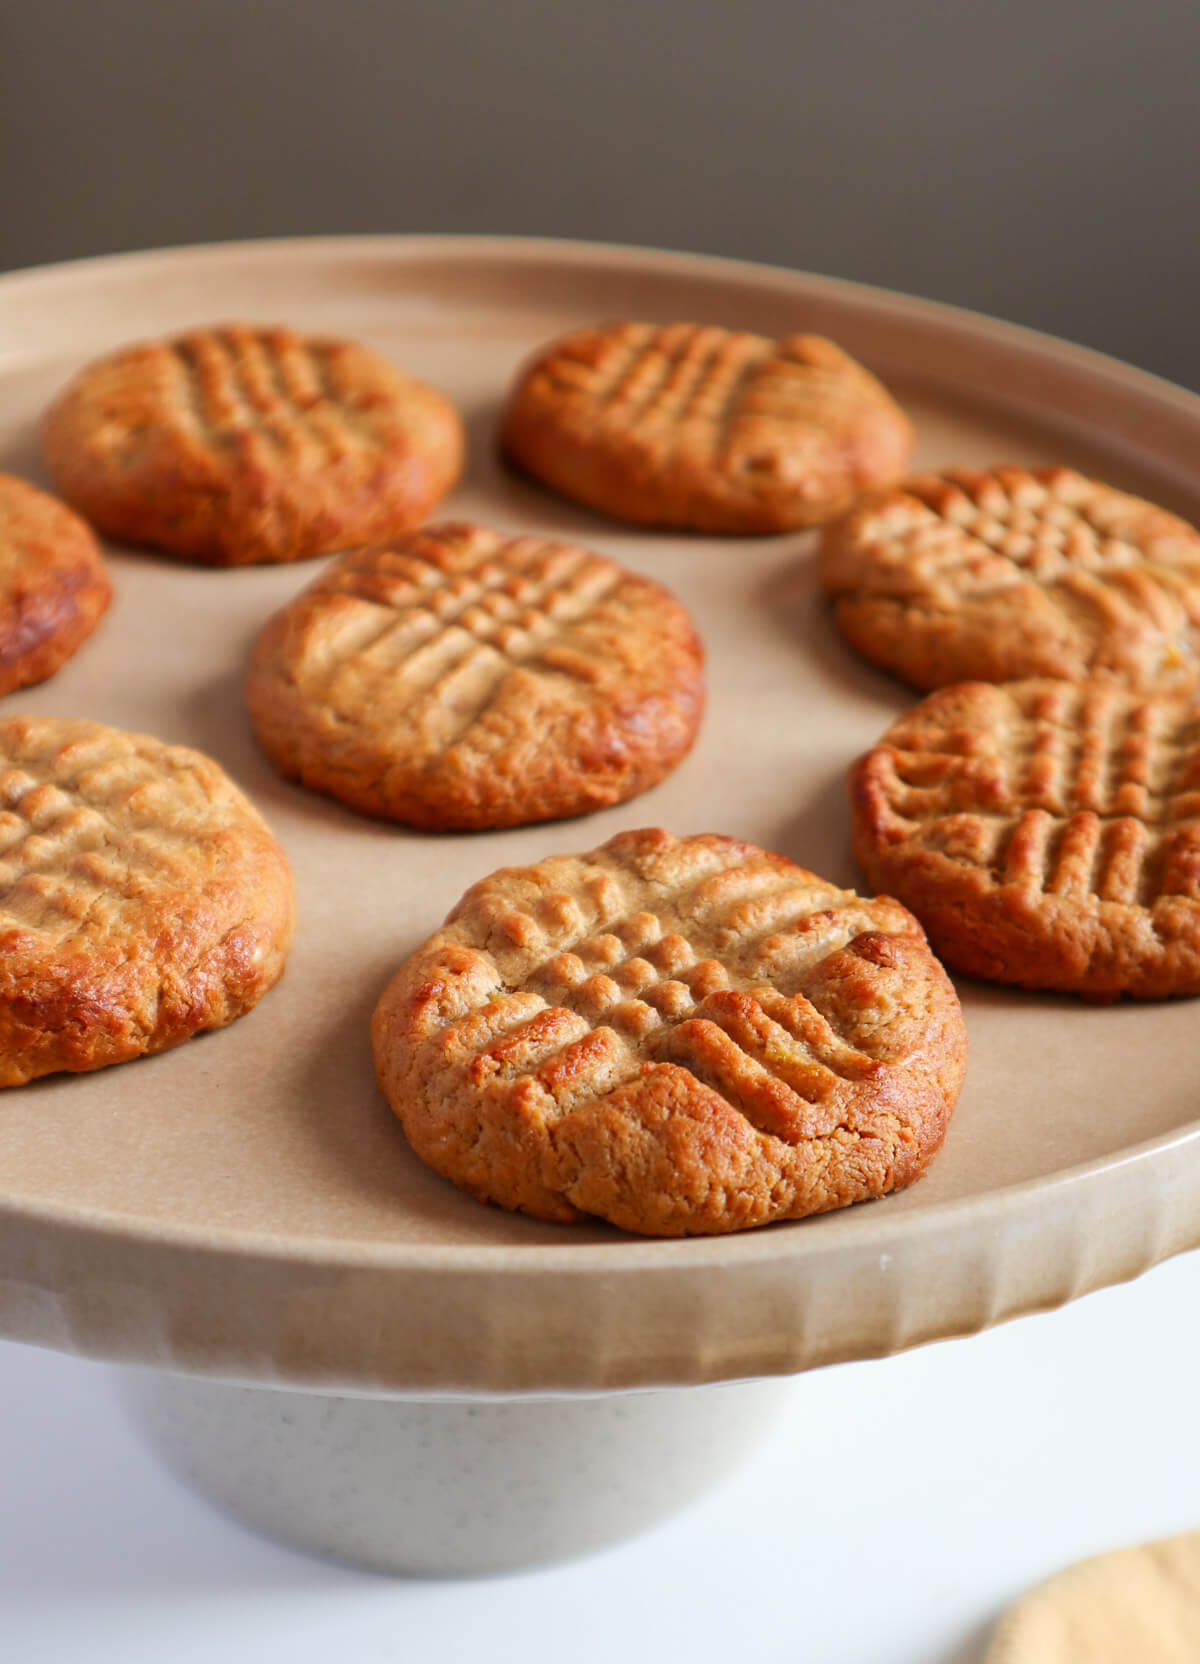 Multiple peanut butter cookies on a grey plate